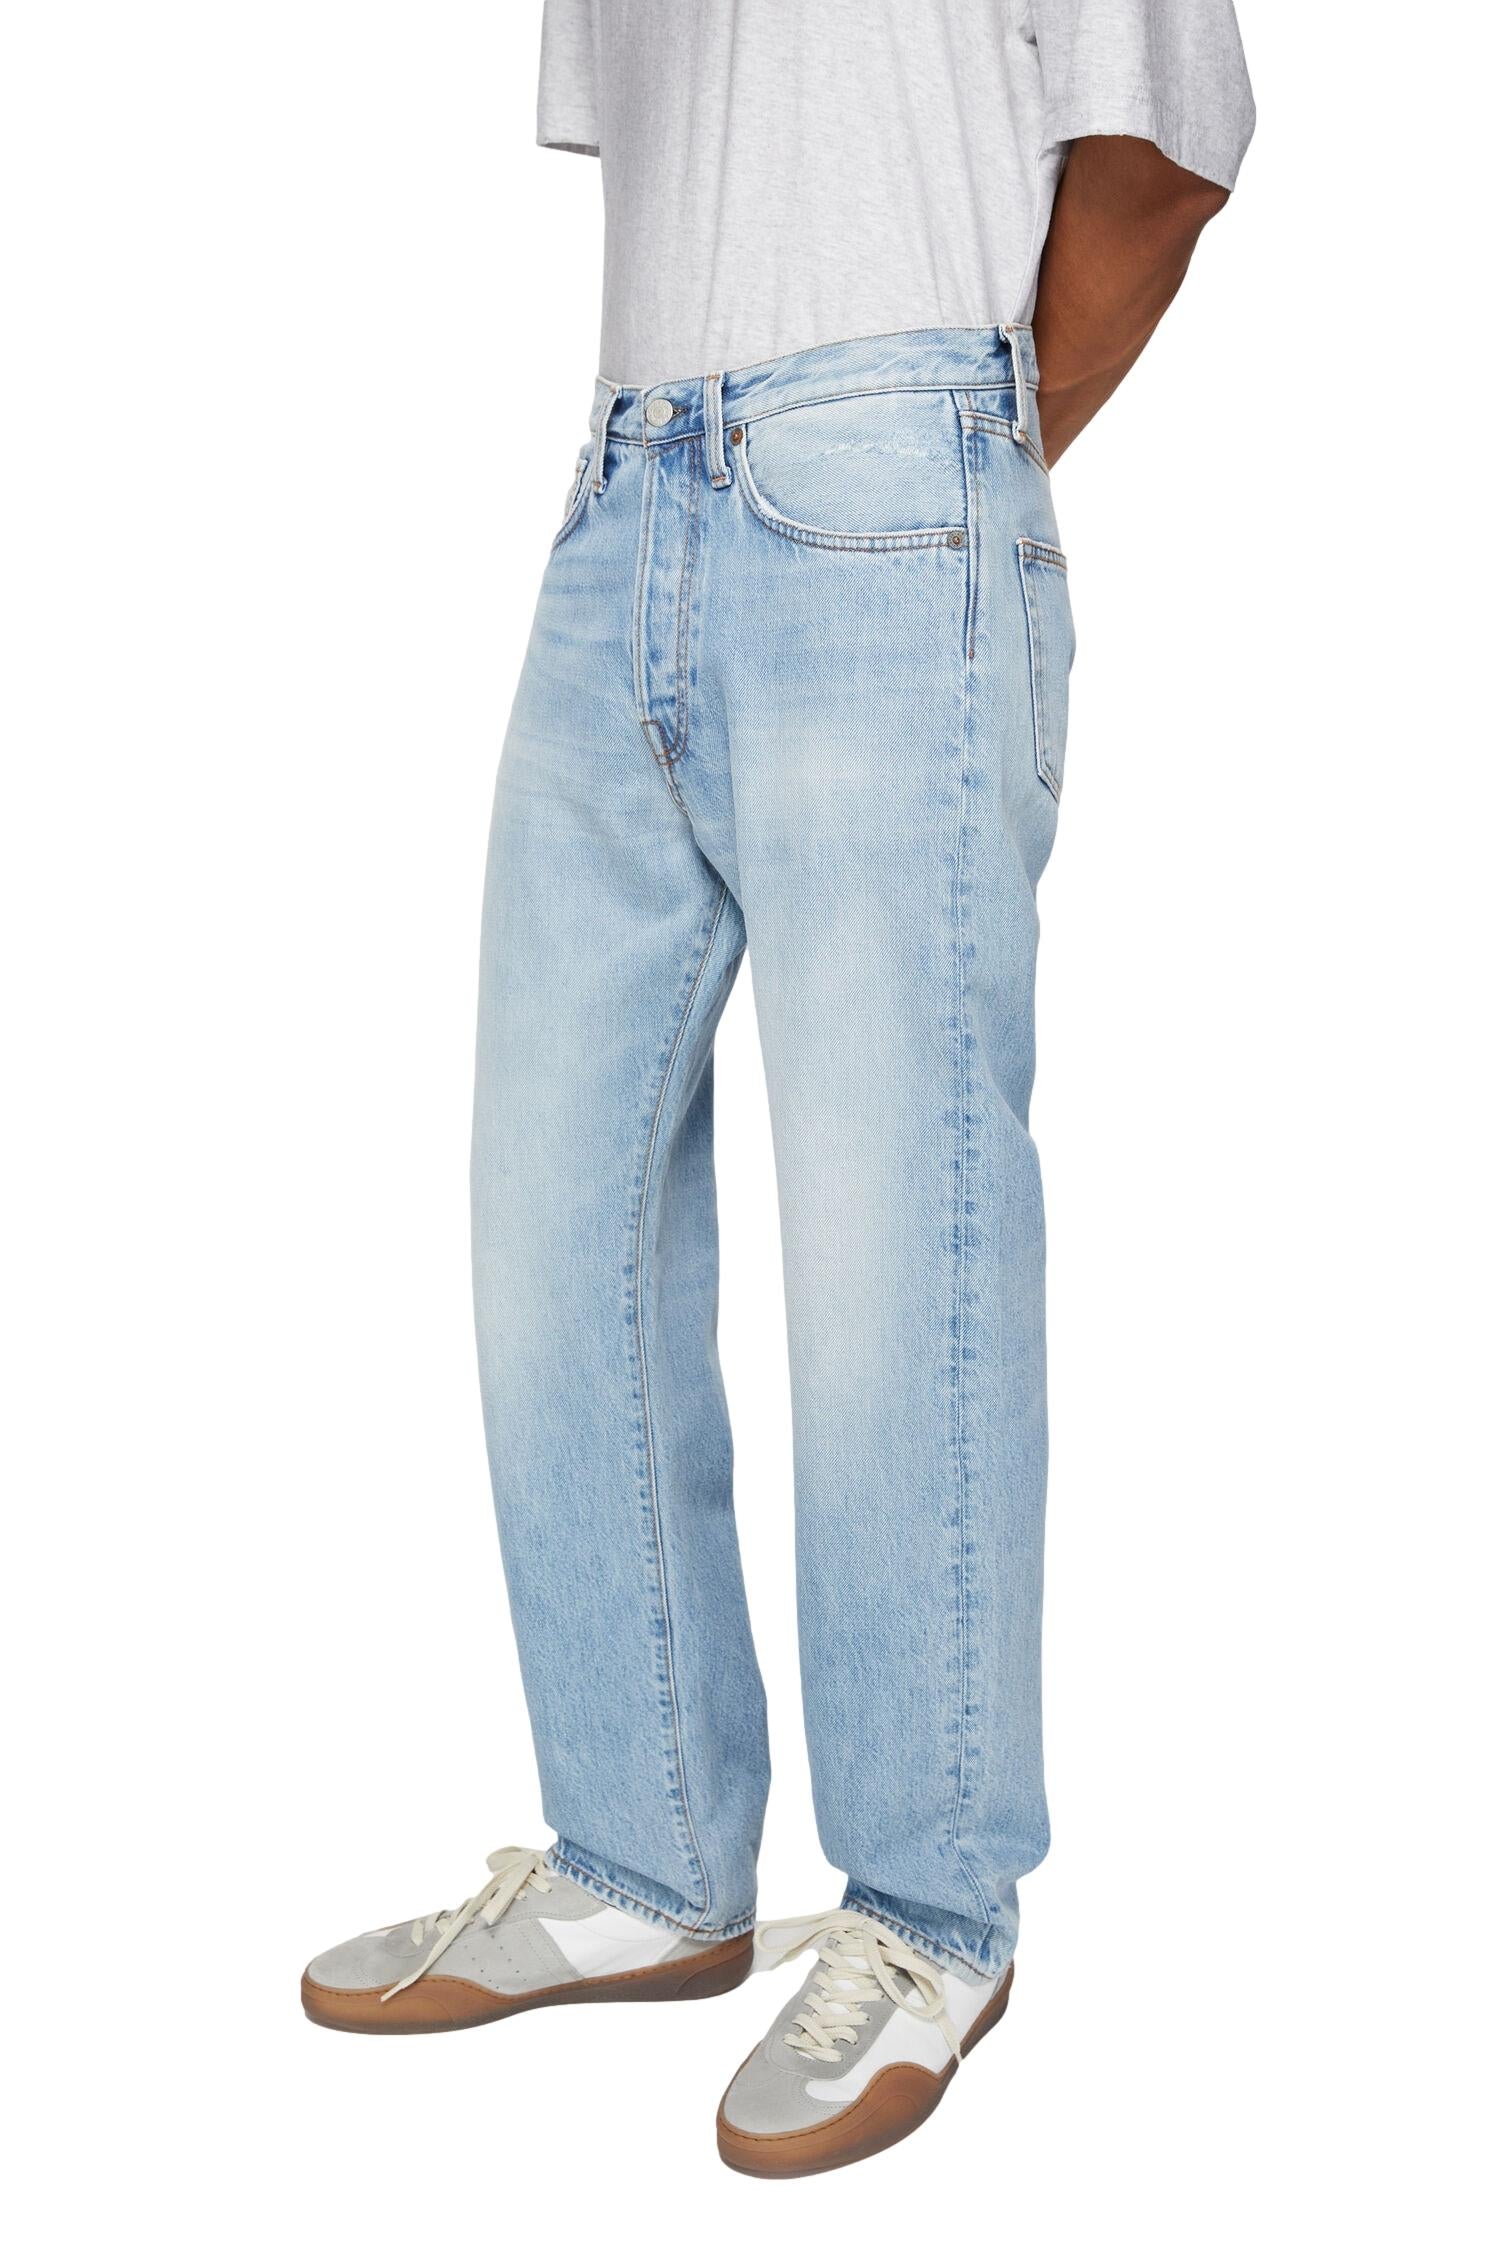 Acne Relaxed Fit Jeans - 2003 Jeans Denim - [modostore.no]